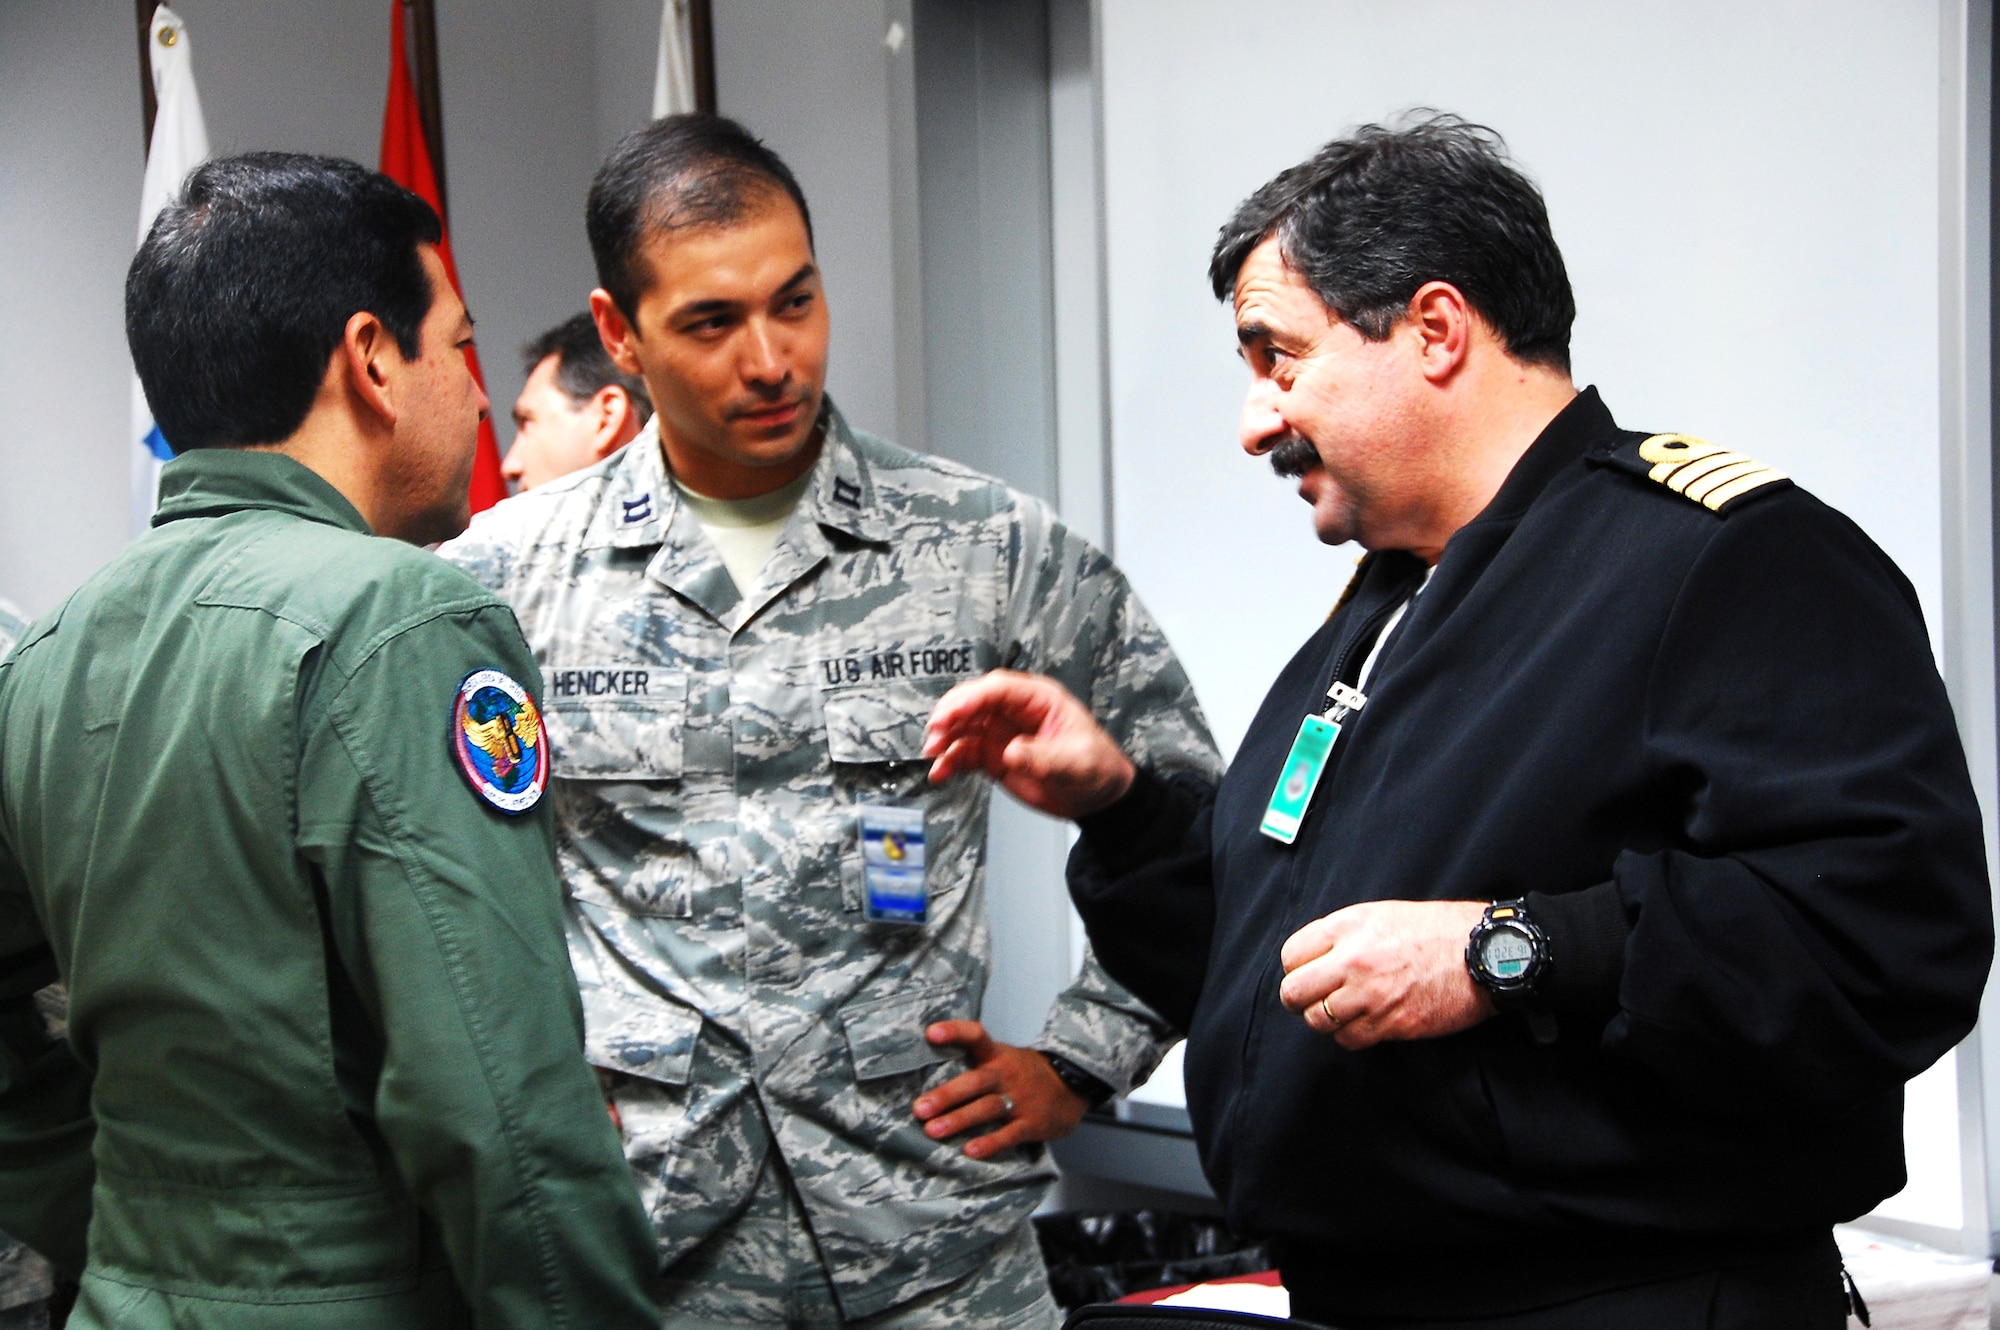 Capt. de Navio Gonzalo Ciganda, the Naval Aviation Group commander from Uruguay (right), talks to Capt. Luis Hencker, U.S. Southern Command (center), and Col. Cesar Macedo, 2nd Air Wing commander from Peru (left) during a break in the first, Spanish-language Building Partners Aviation Capacity Course Sept. 9, 2014 at the U.S. Air Force Special Operations School, Hurlburt Field, Fla. The BPACC is a two-week course bringing together partner nation representatives with their U.S. counterparts and building a shared, practical vision for aviation resource development.  This iteration, which met Sept. 8-19, brought in 14 international students from nine allied countries as well as a select group of 22 U.S. students. (U.S. Air Force photo by Lori Werth)